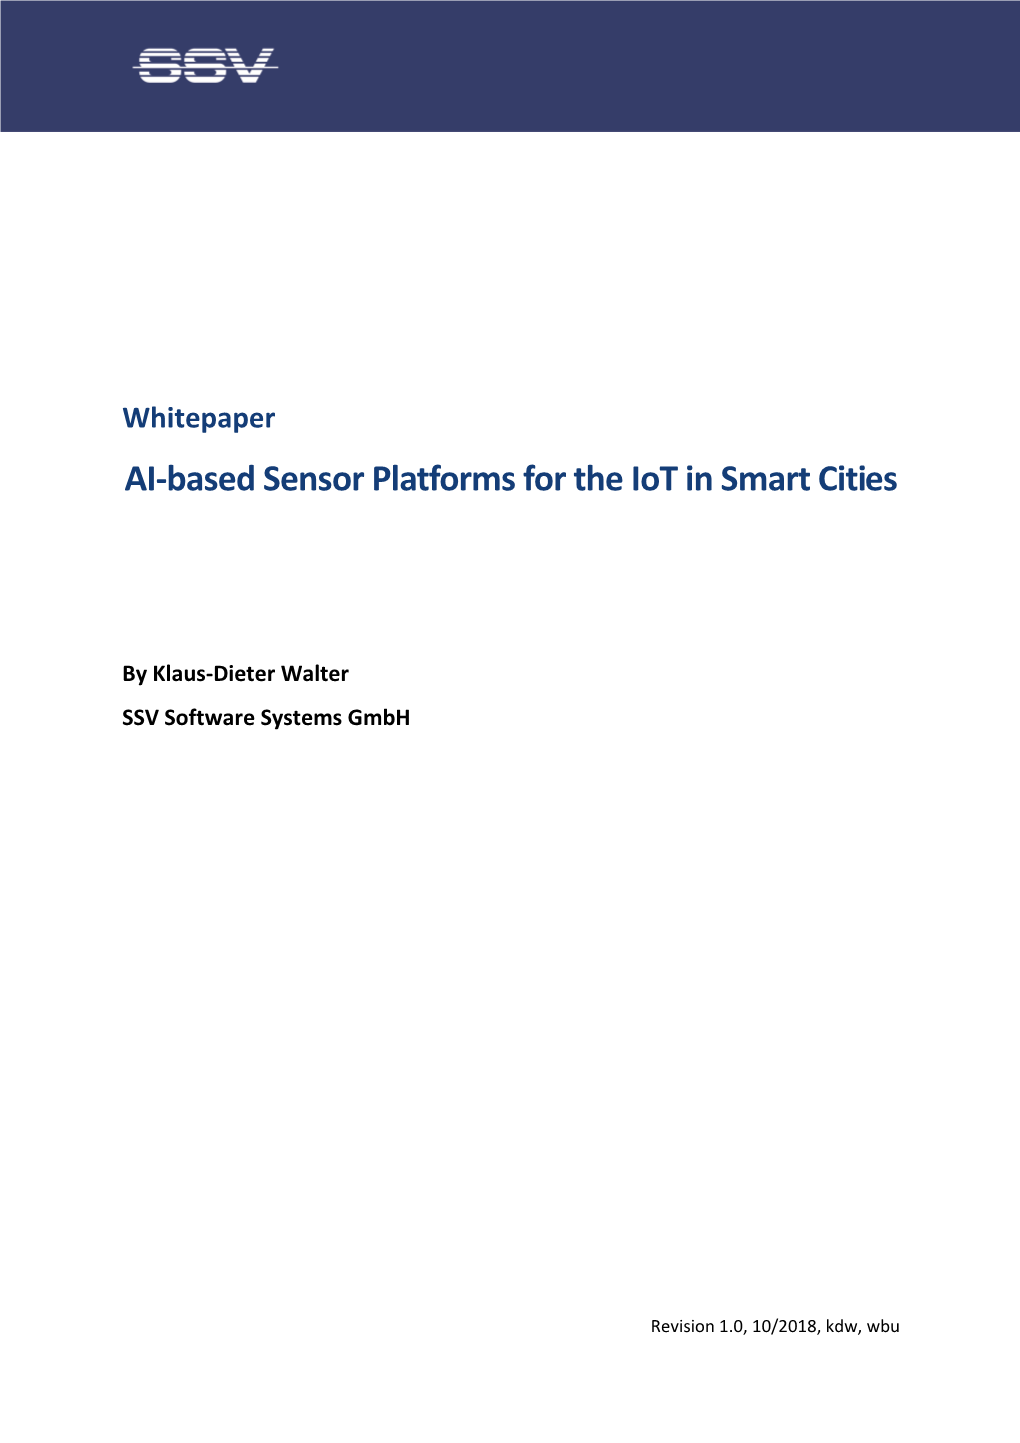 AI-Based Sensor Platforms for the Iot in Smart Cities